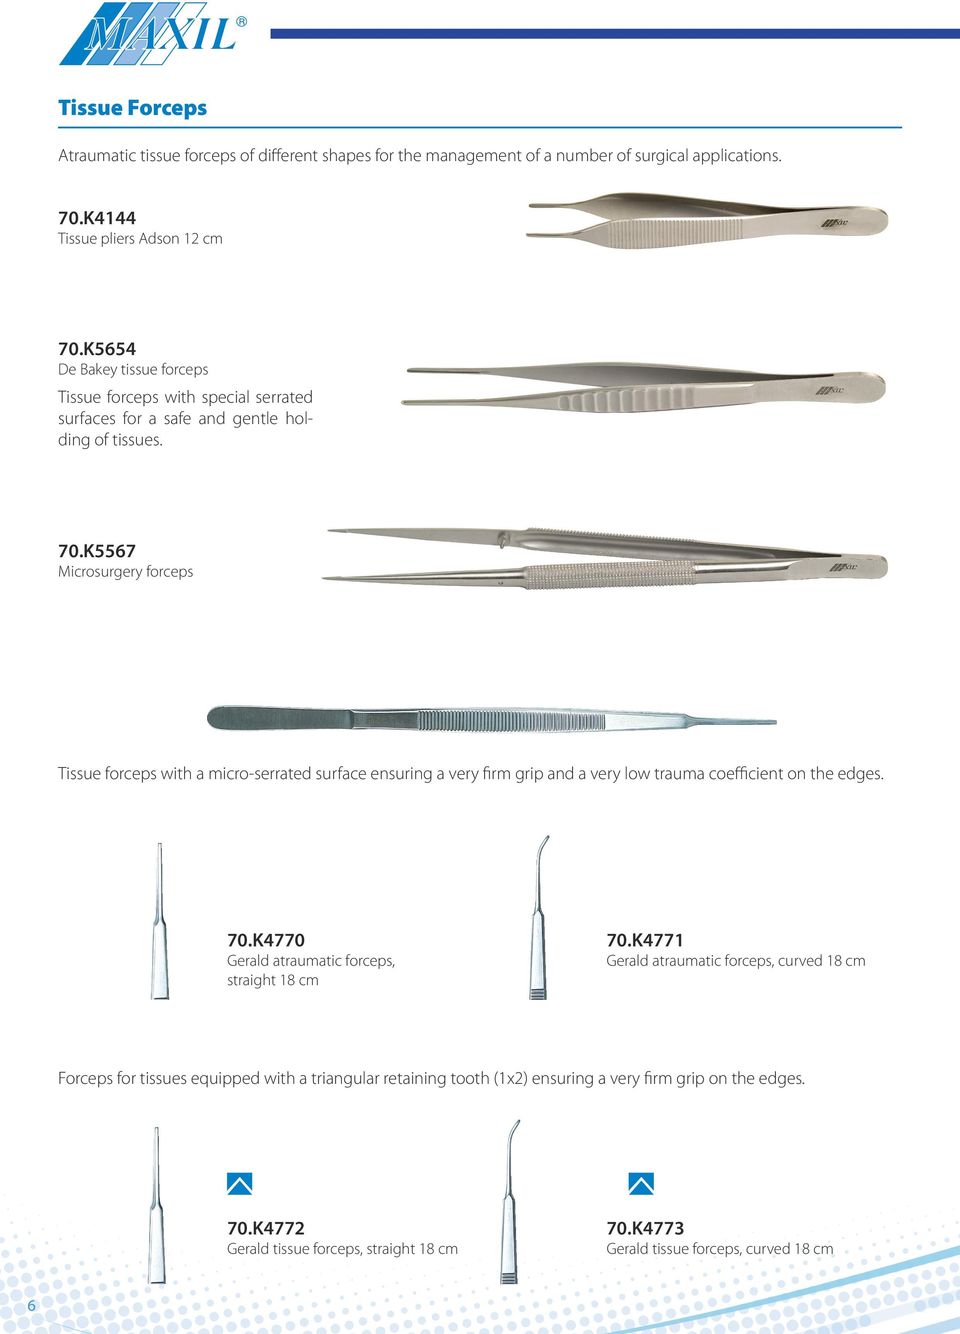 K5567 Microsurgery forceps Tissue forceps with a micro-serrated surface ensuring a very firm grip and a very low trauma coefficient on the edges. 70.